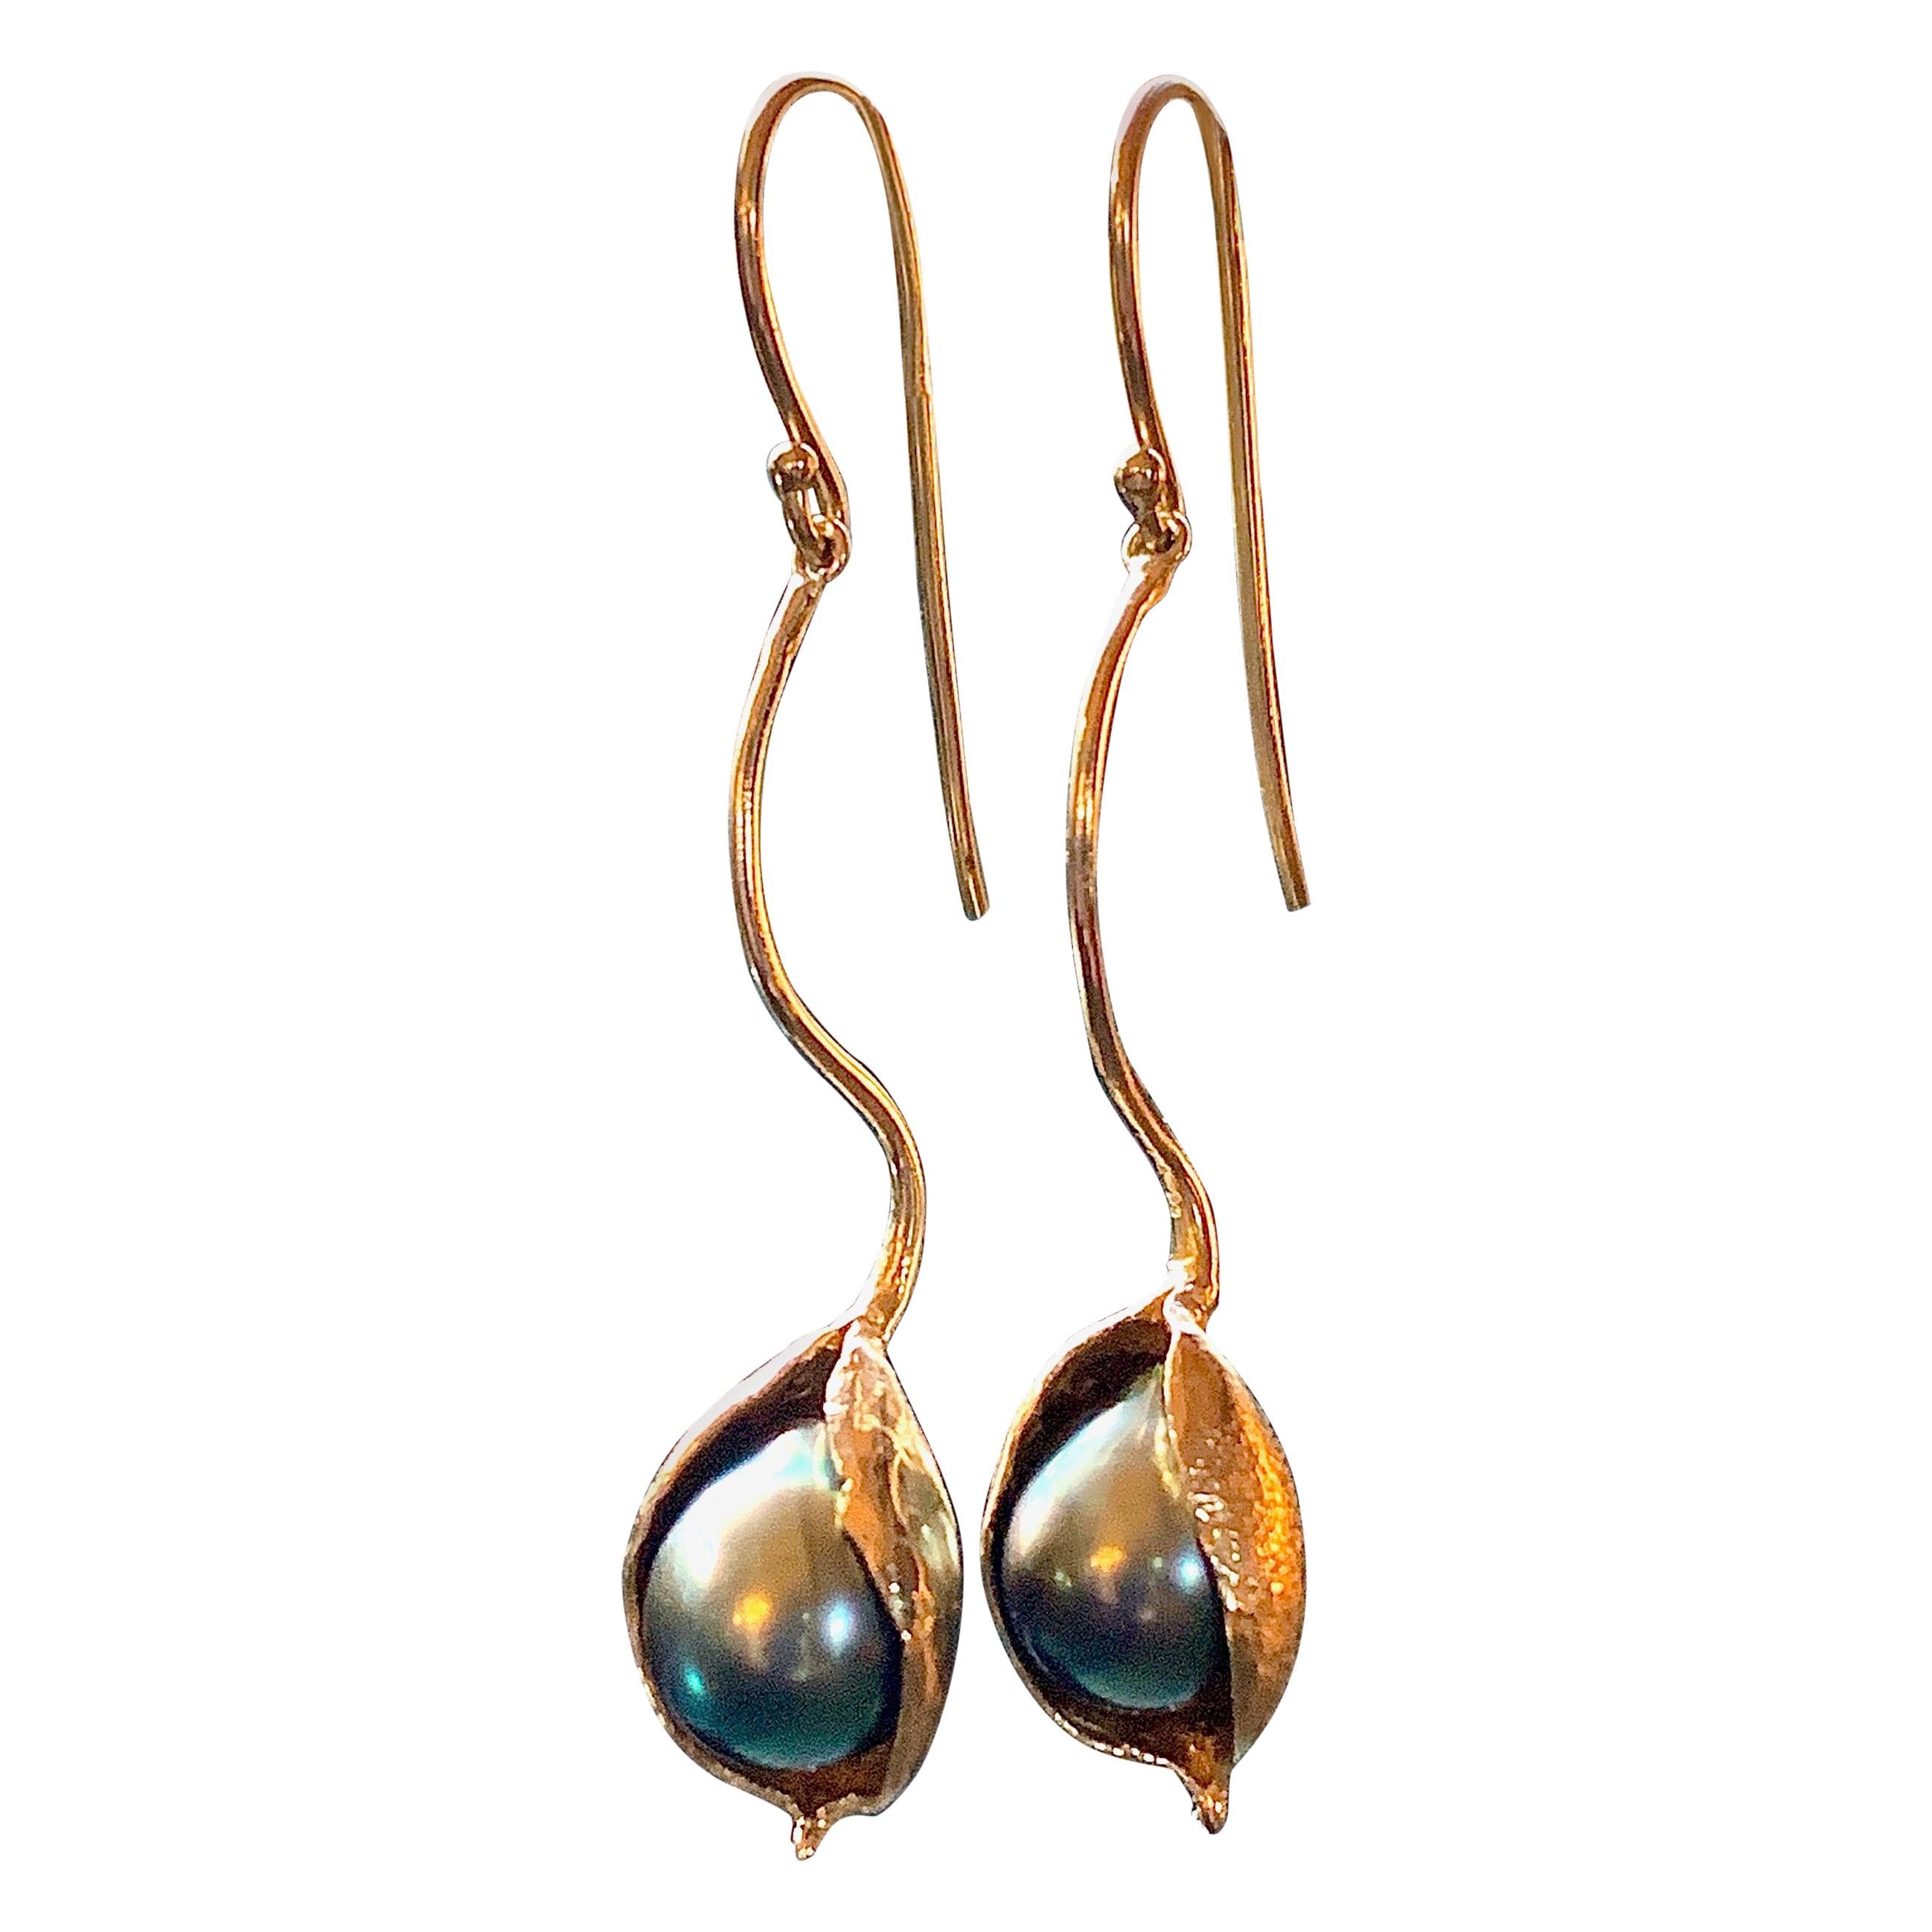 Eytan Brandes used actual seed pods to make these long 14 karat yellow gold earrings.  The lustrous, purply green baroque Tahitian pearls are about 10mm each.  The pods are suspended on contoured wires hinged near the top to allow for movement. 